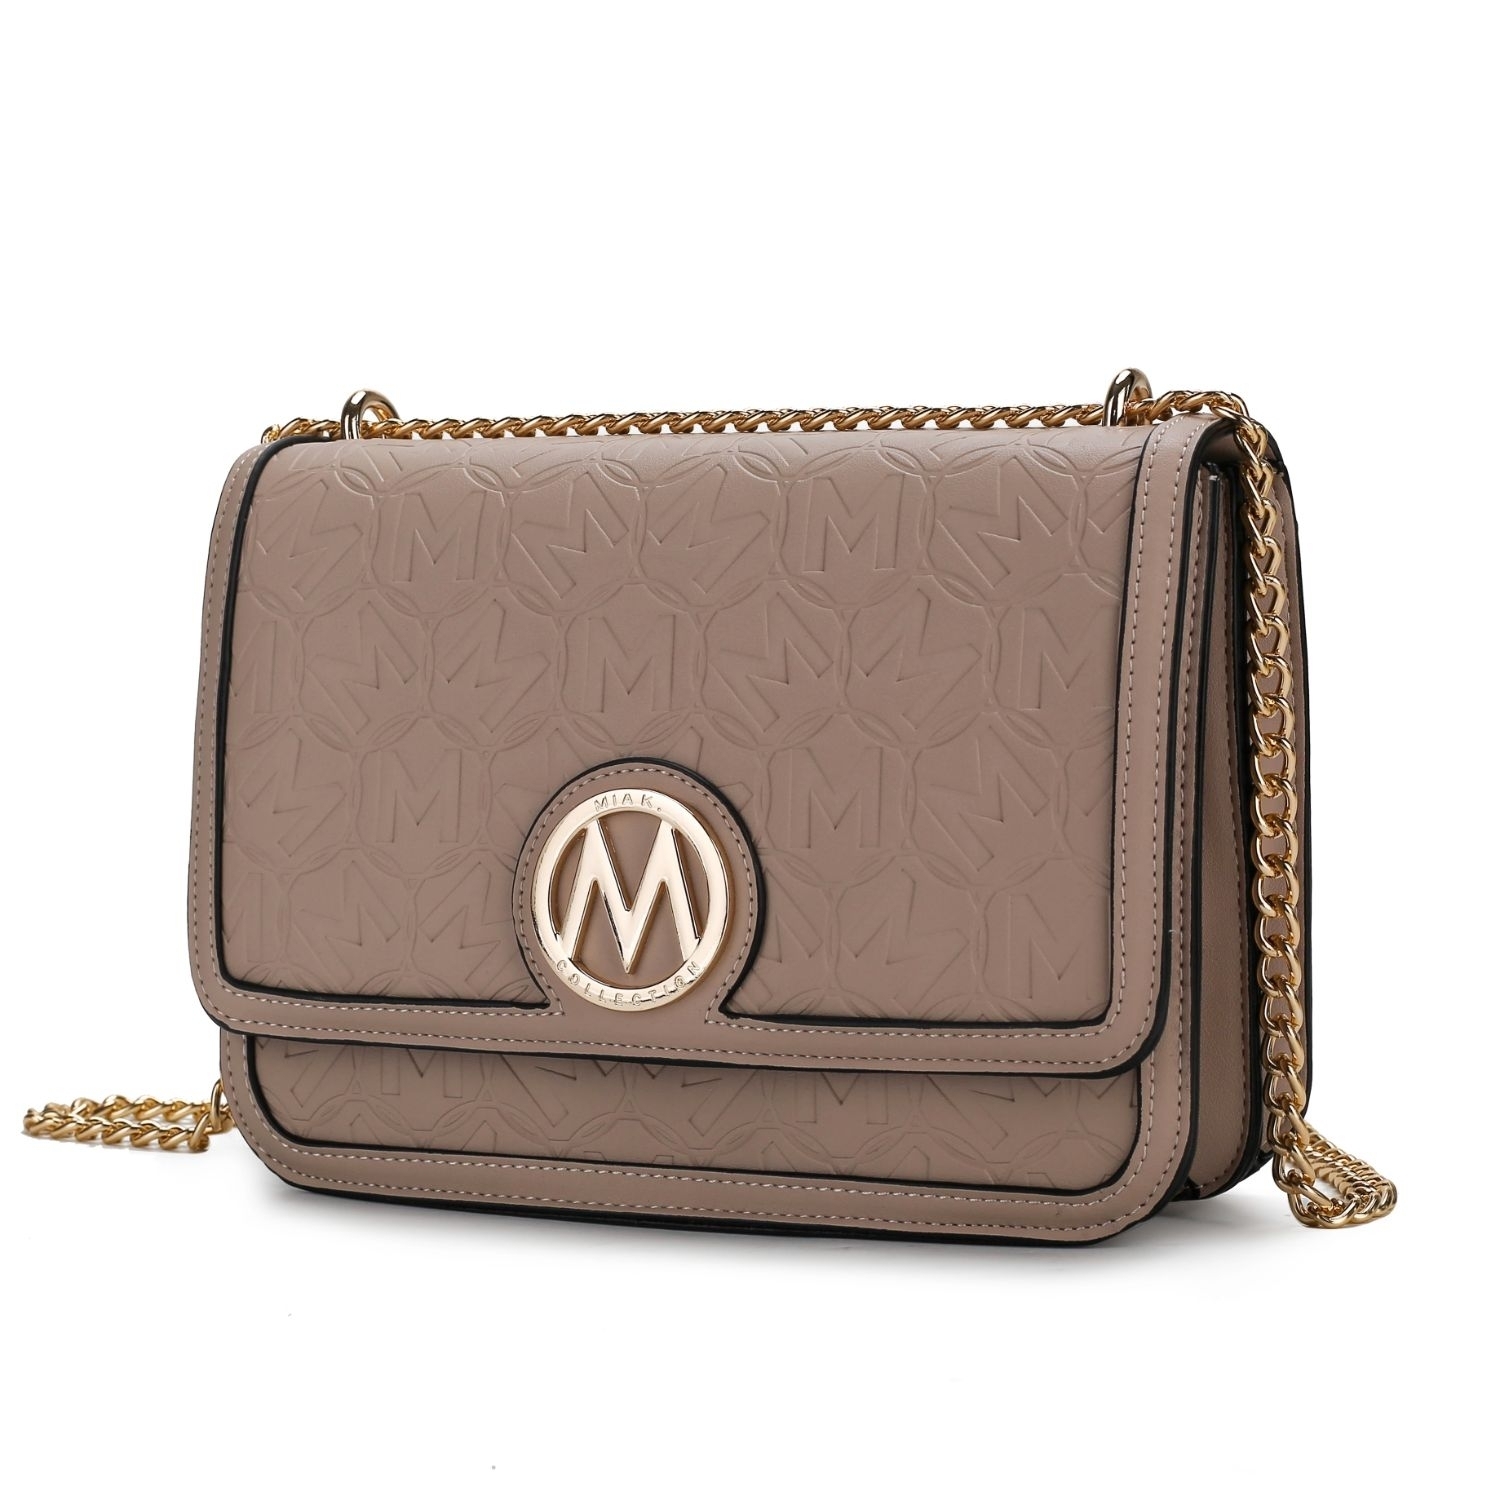 MKF Collection Amiyah Vegan Leather Women's Shoulder Bag By Mia K - Taupe